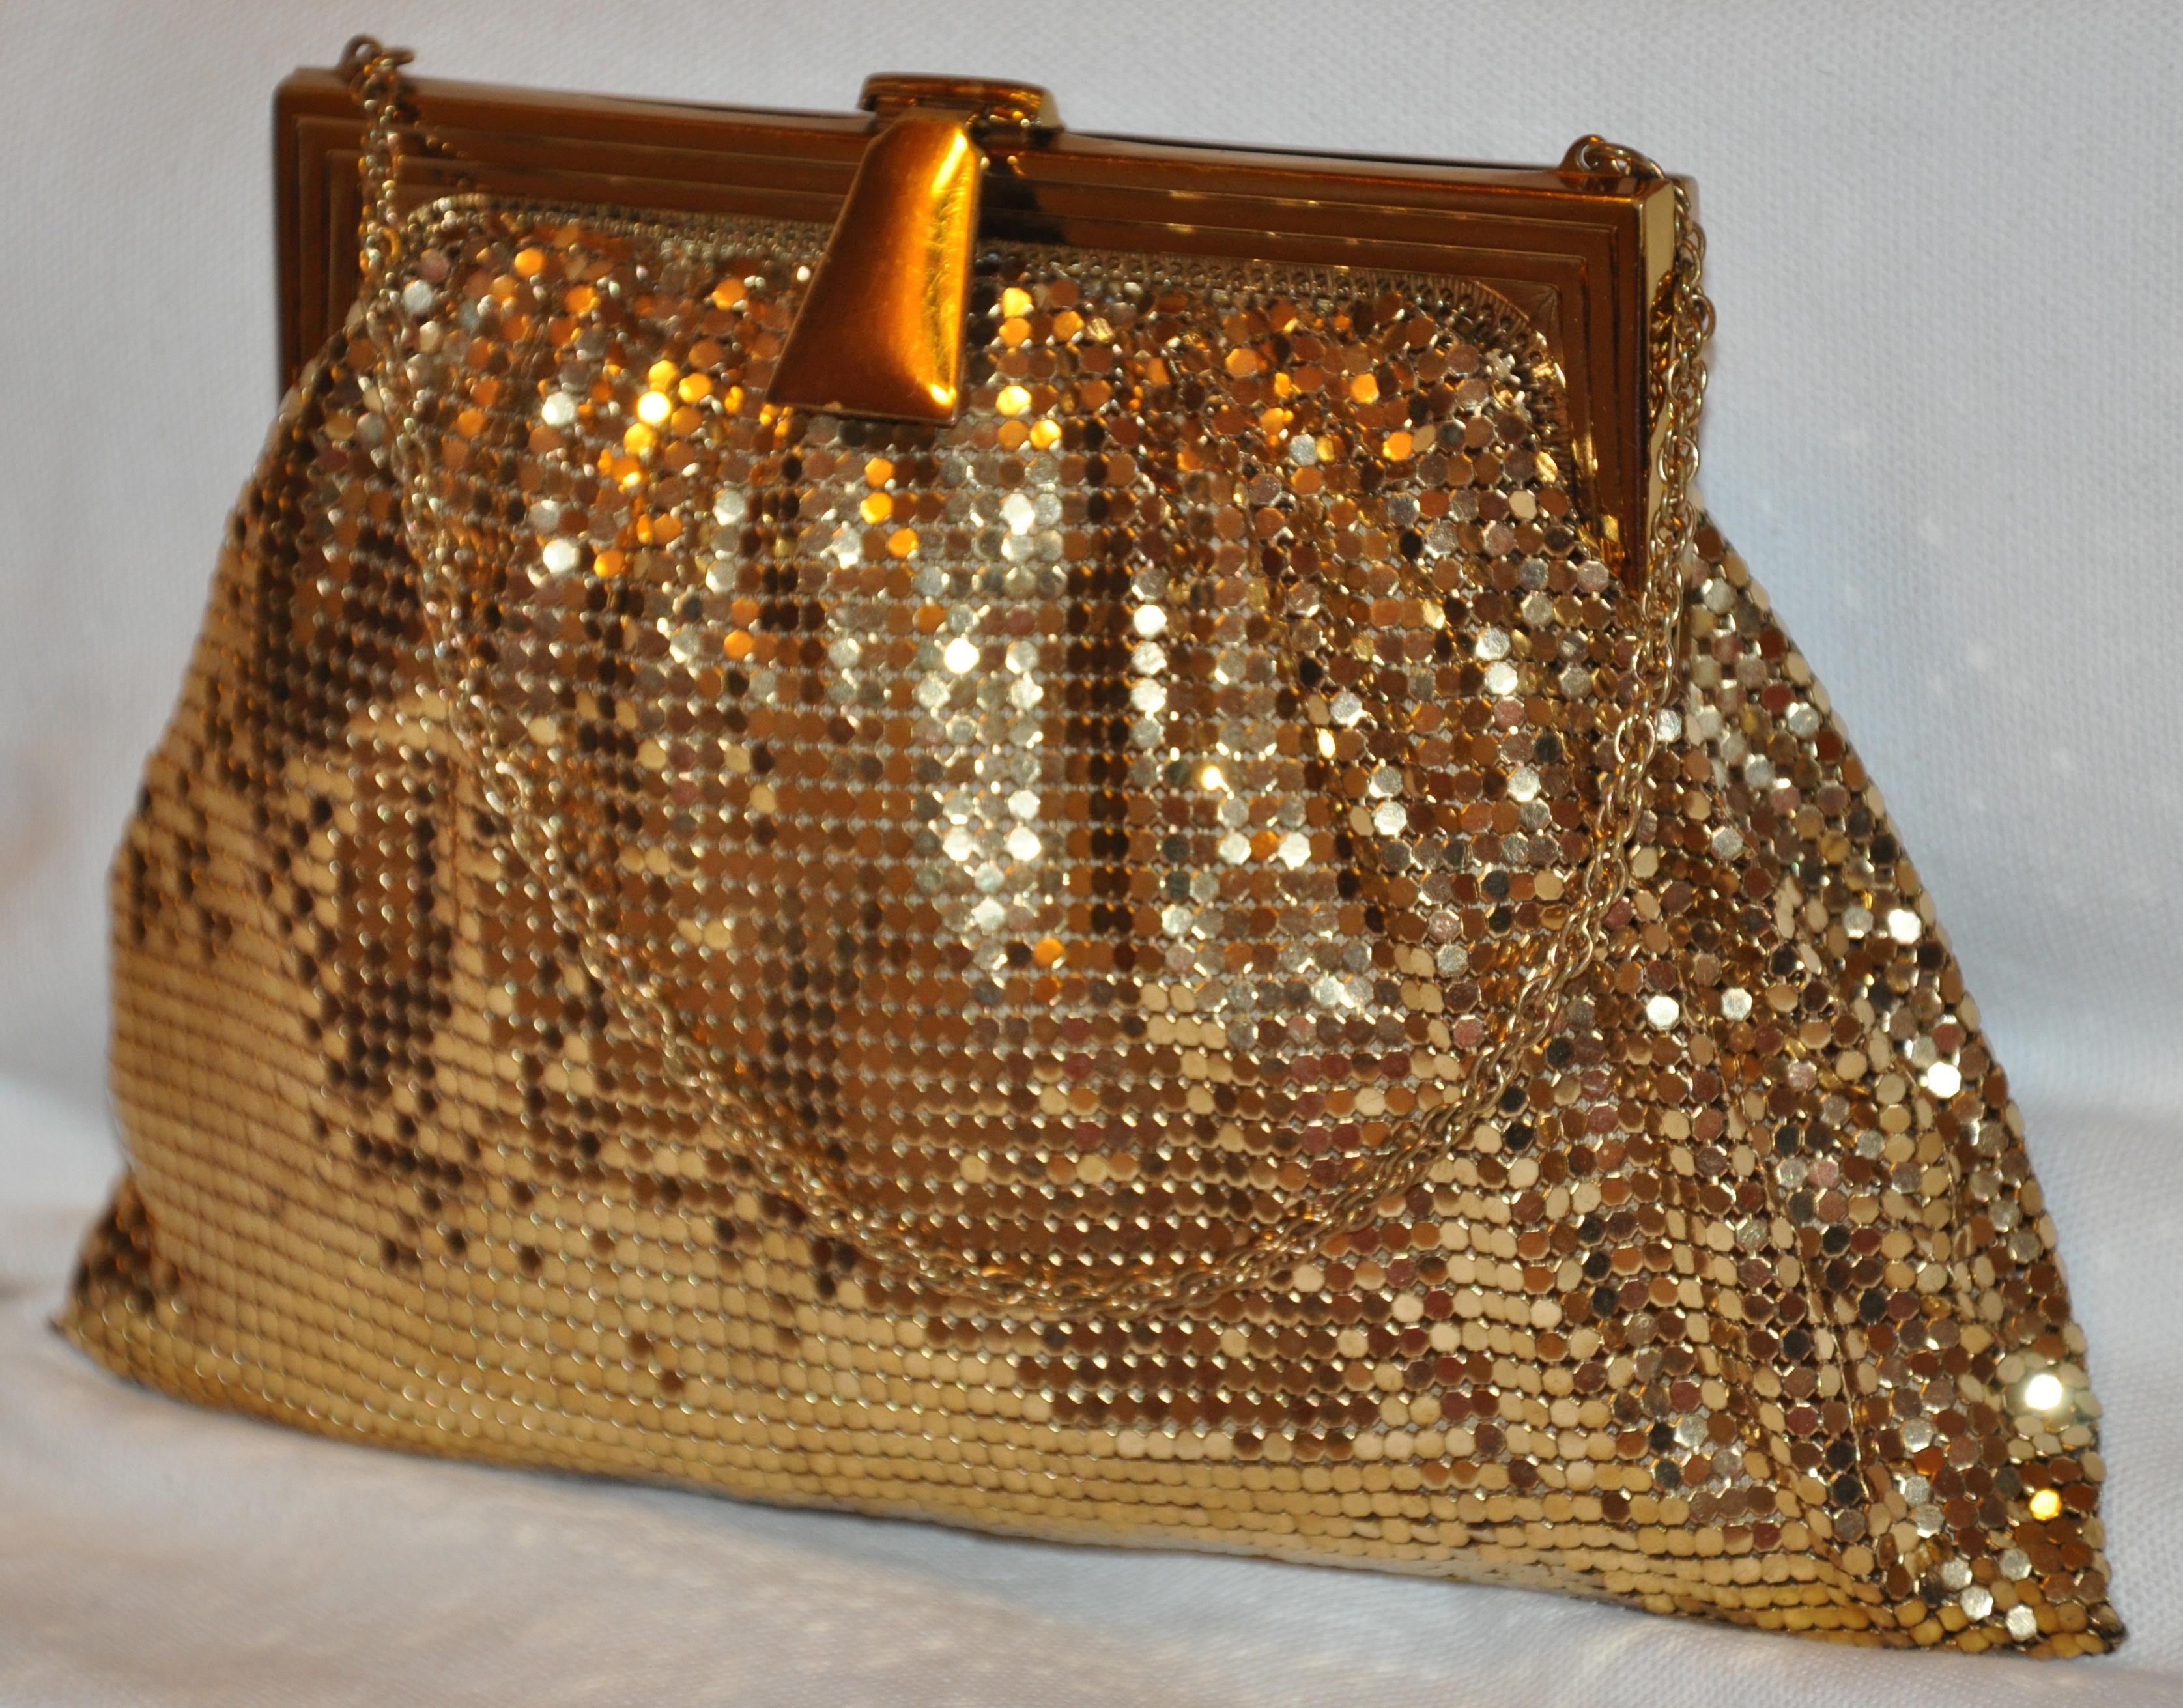        Whiting & Davis wonderfully elegant gilded gold hardware mesh evening bag is accented with a matching gilded gold hardware chain strap which measures 5 inches in height. The length measures 8 inches along the bottom and 5 inches along the